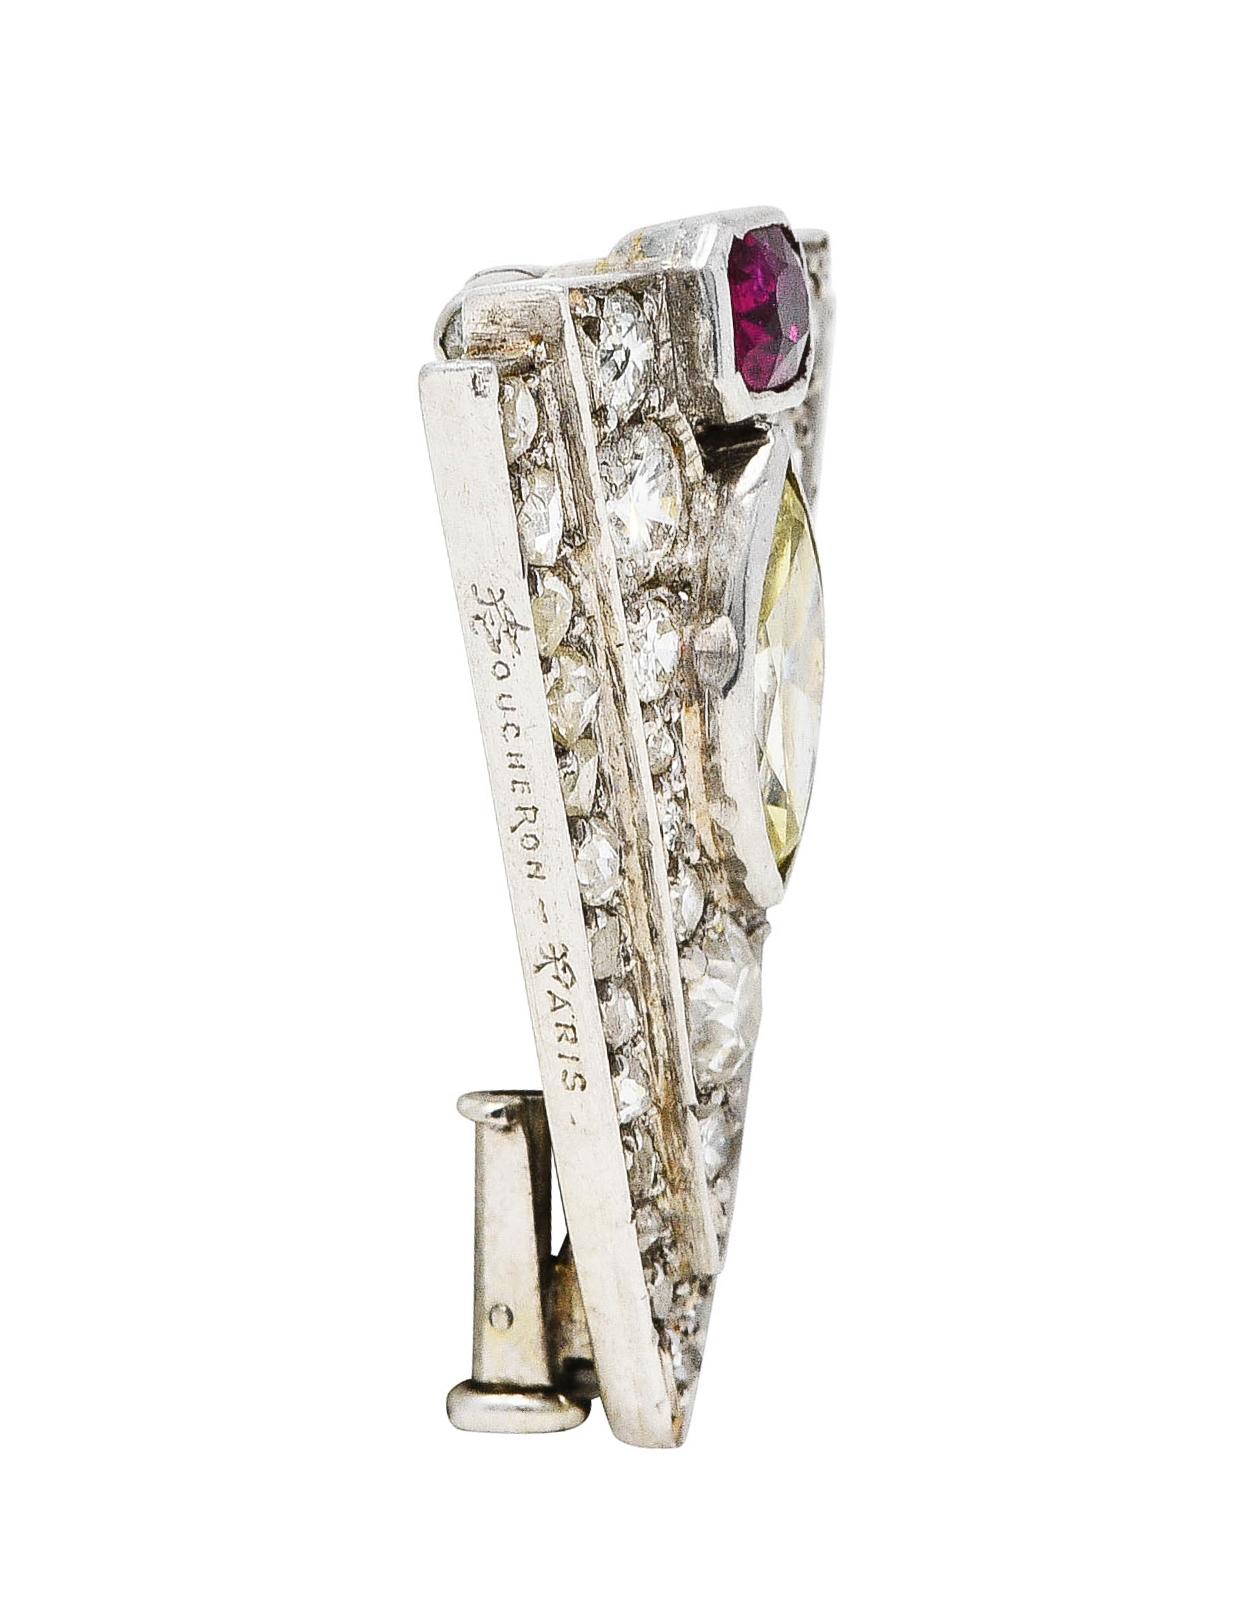 Brooch clip is triangular in form that centers a marquise cut diamond

Weighing approximately 0.40 carat - O/P+ in color with SI2 clarity

Topped by an emerald cut ruby weighing approximately 0.25 carat - slightly violetish and strongly